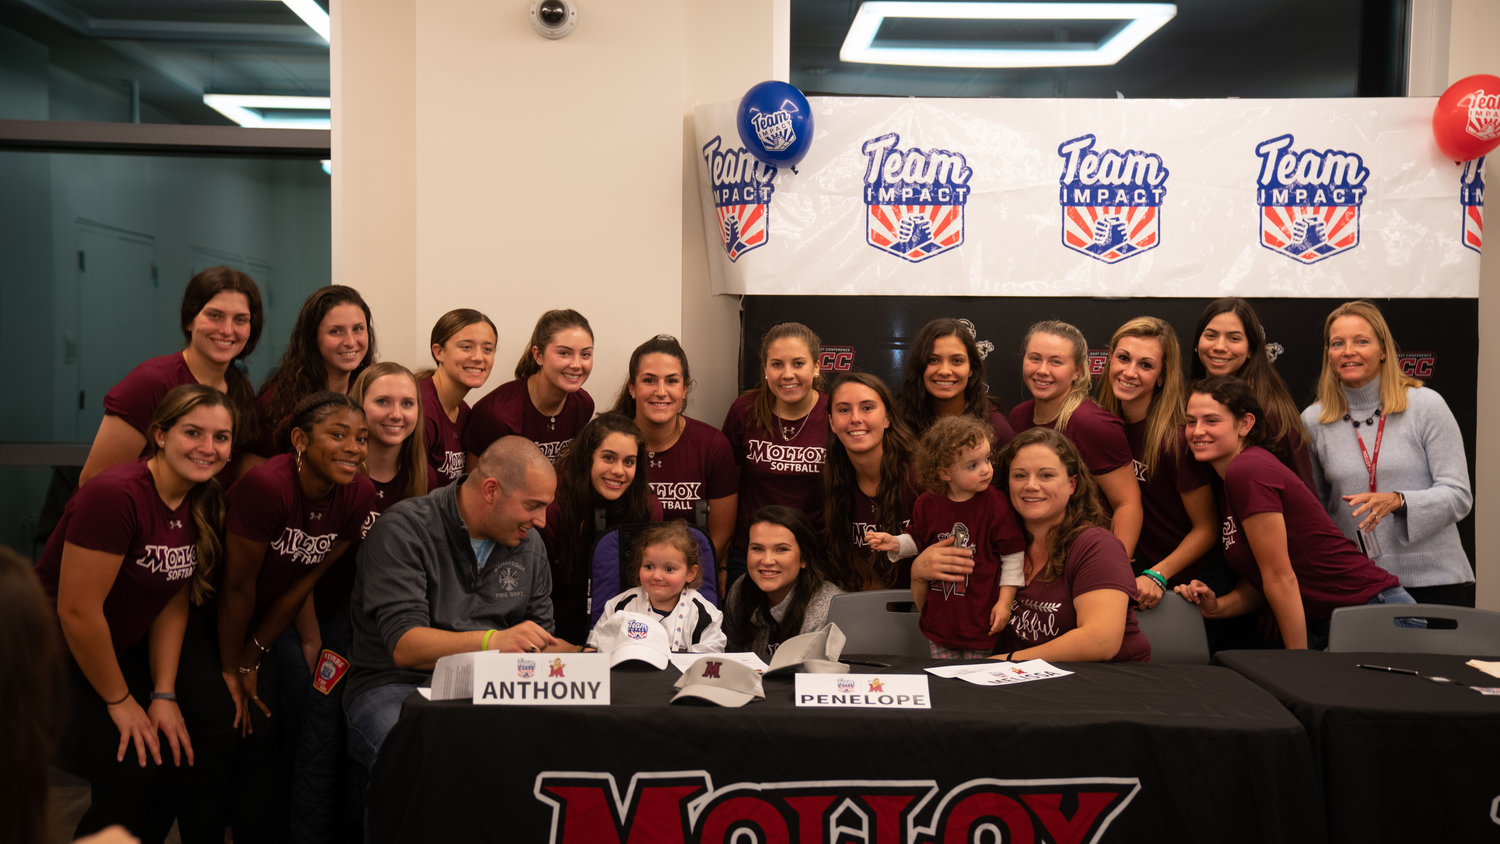 Penelope DiChiara and her family with the Molloy softball team.